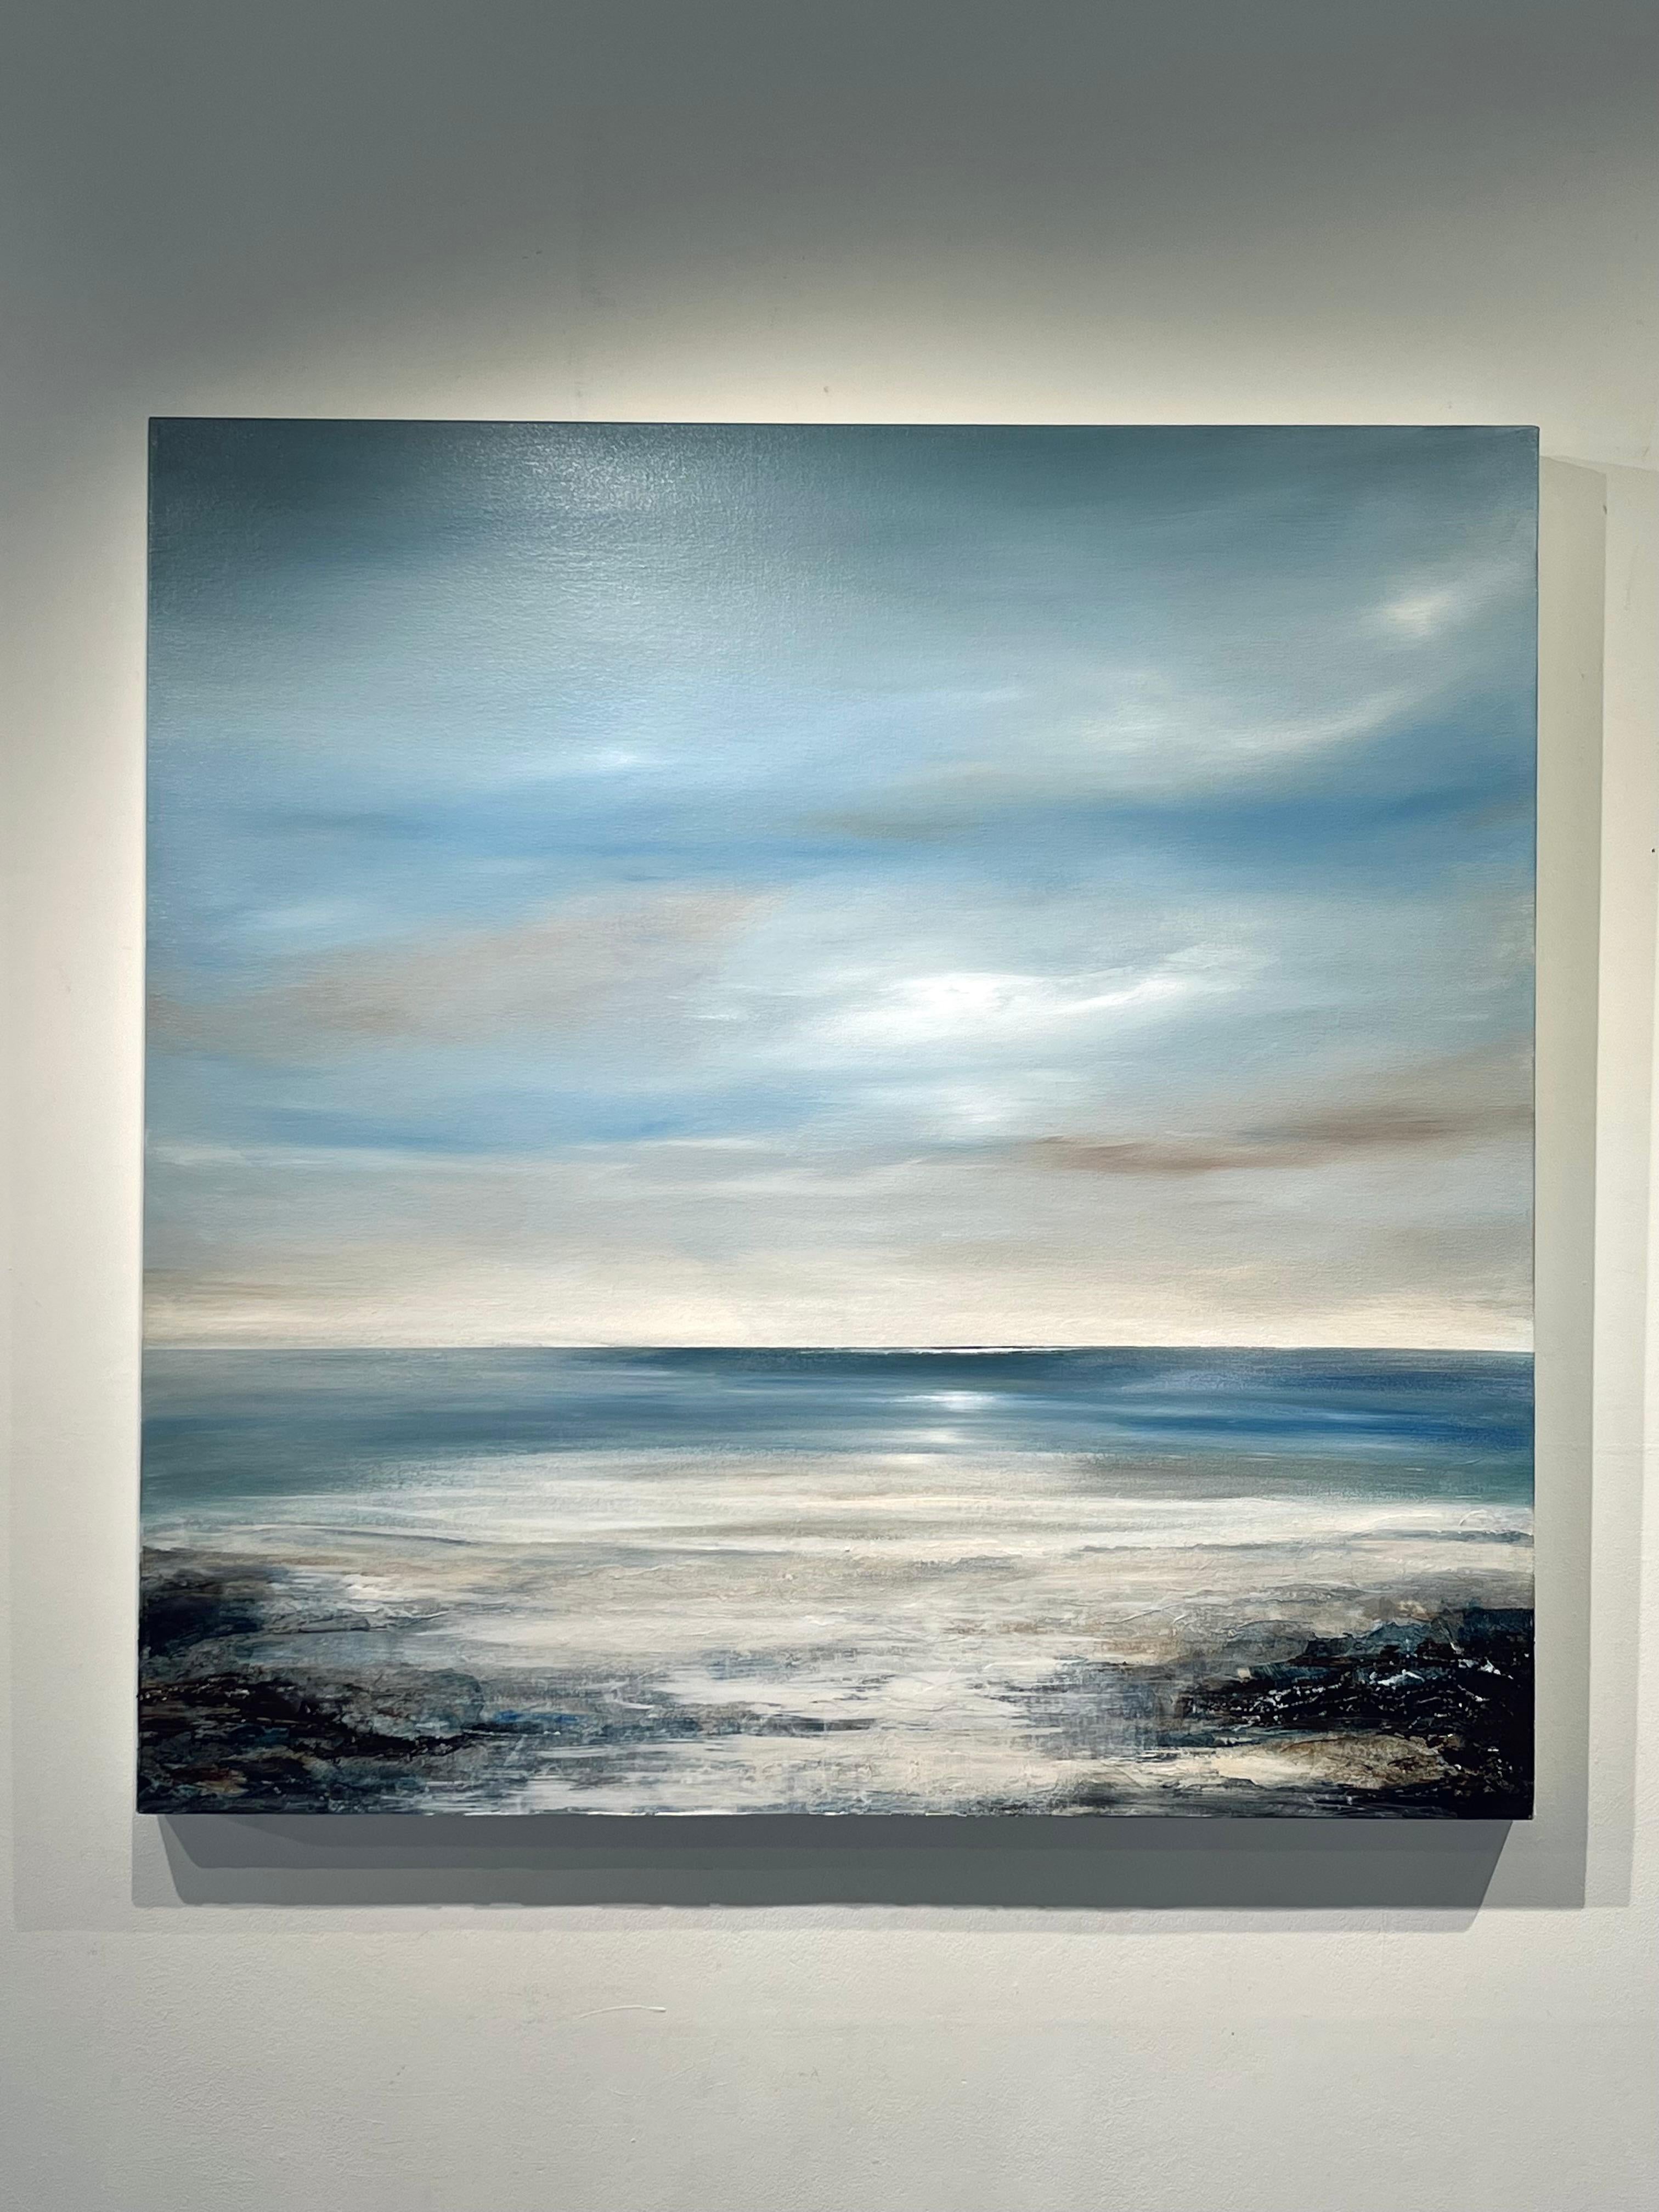 Catching the Light-original abstract seascape -ocean painting-contemporary art - Painting by Leila Godden UA